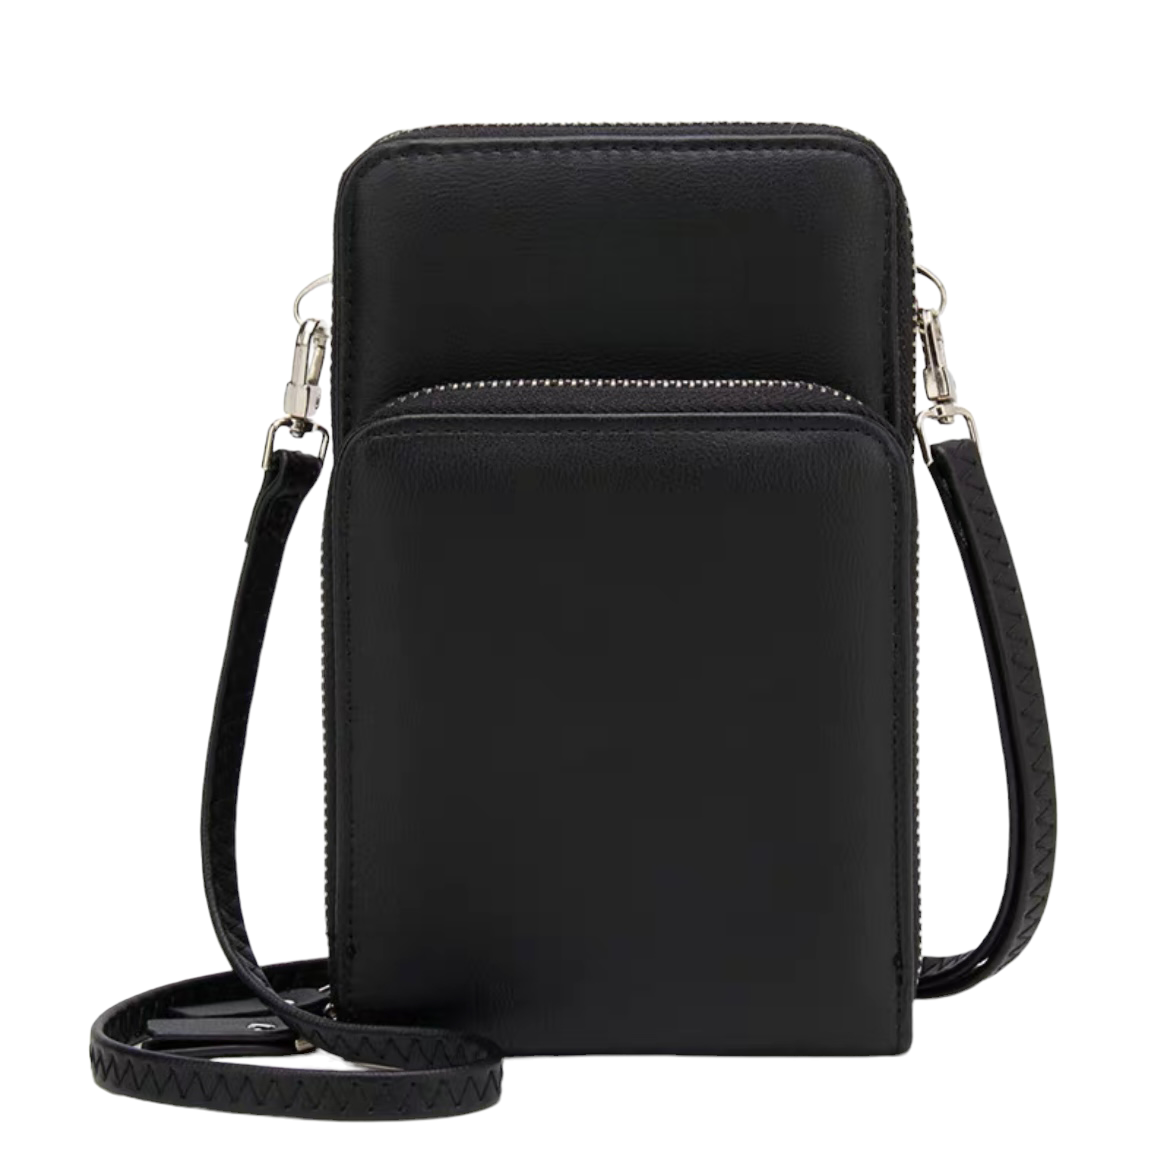 Bellade Crossbody Cell Phone Pouch Shoulder Sling Bag with Card Holder ...